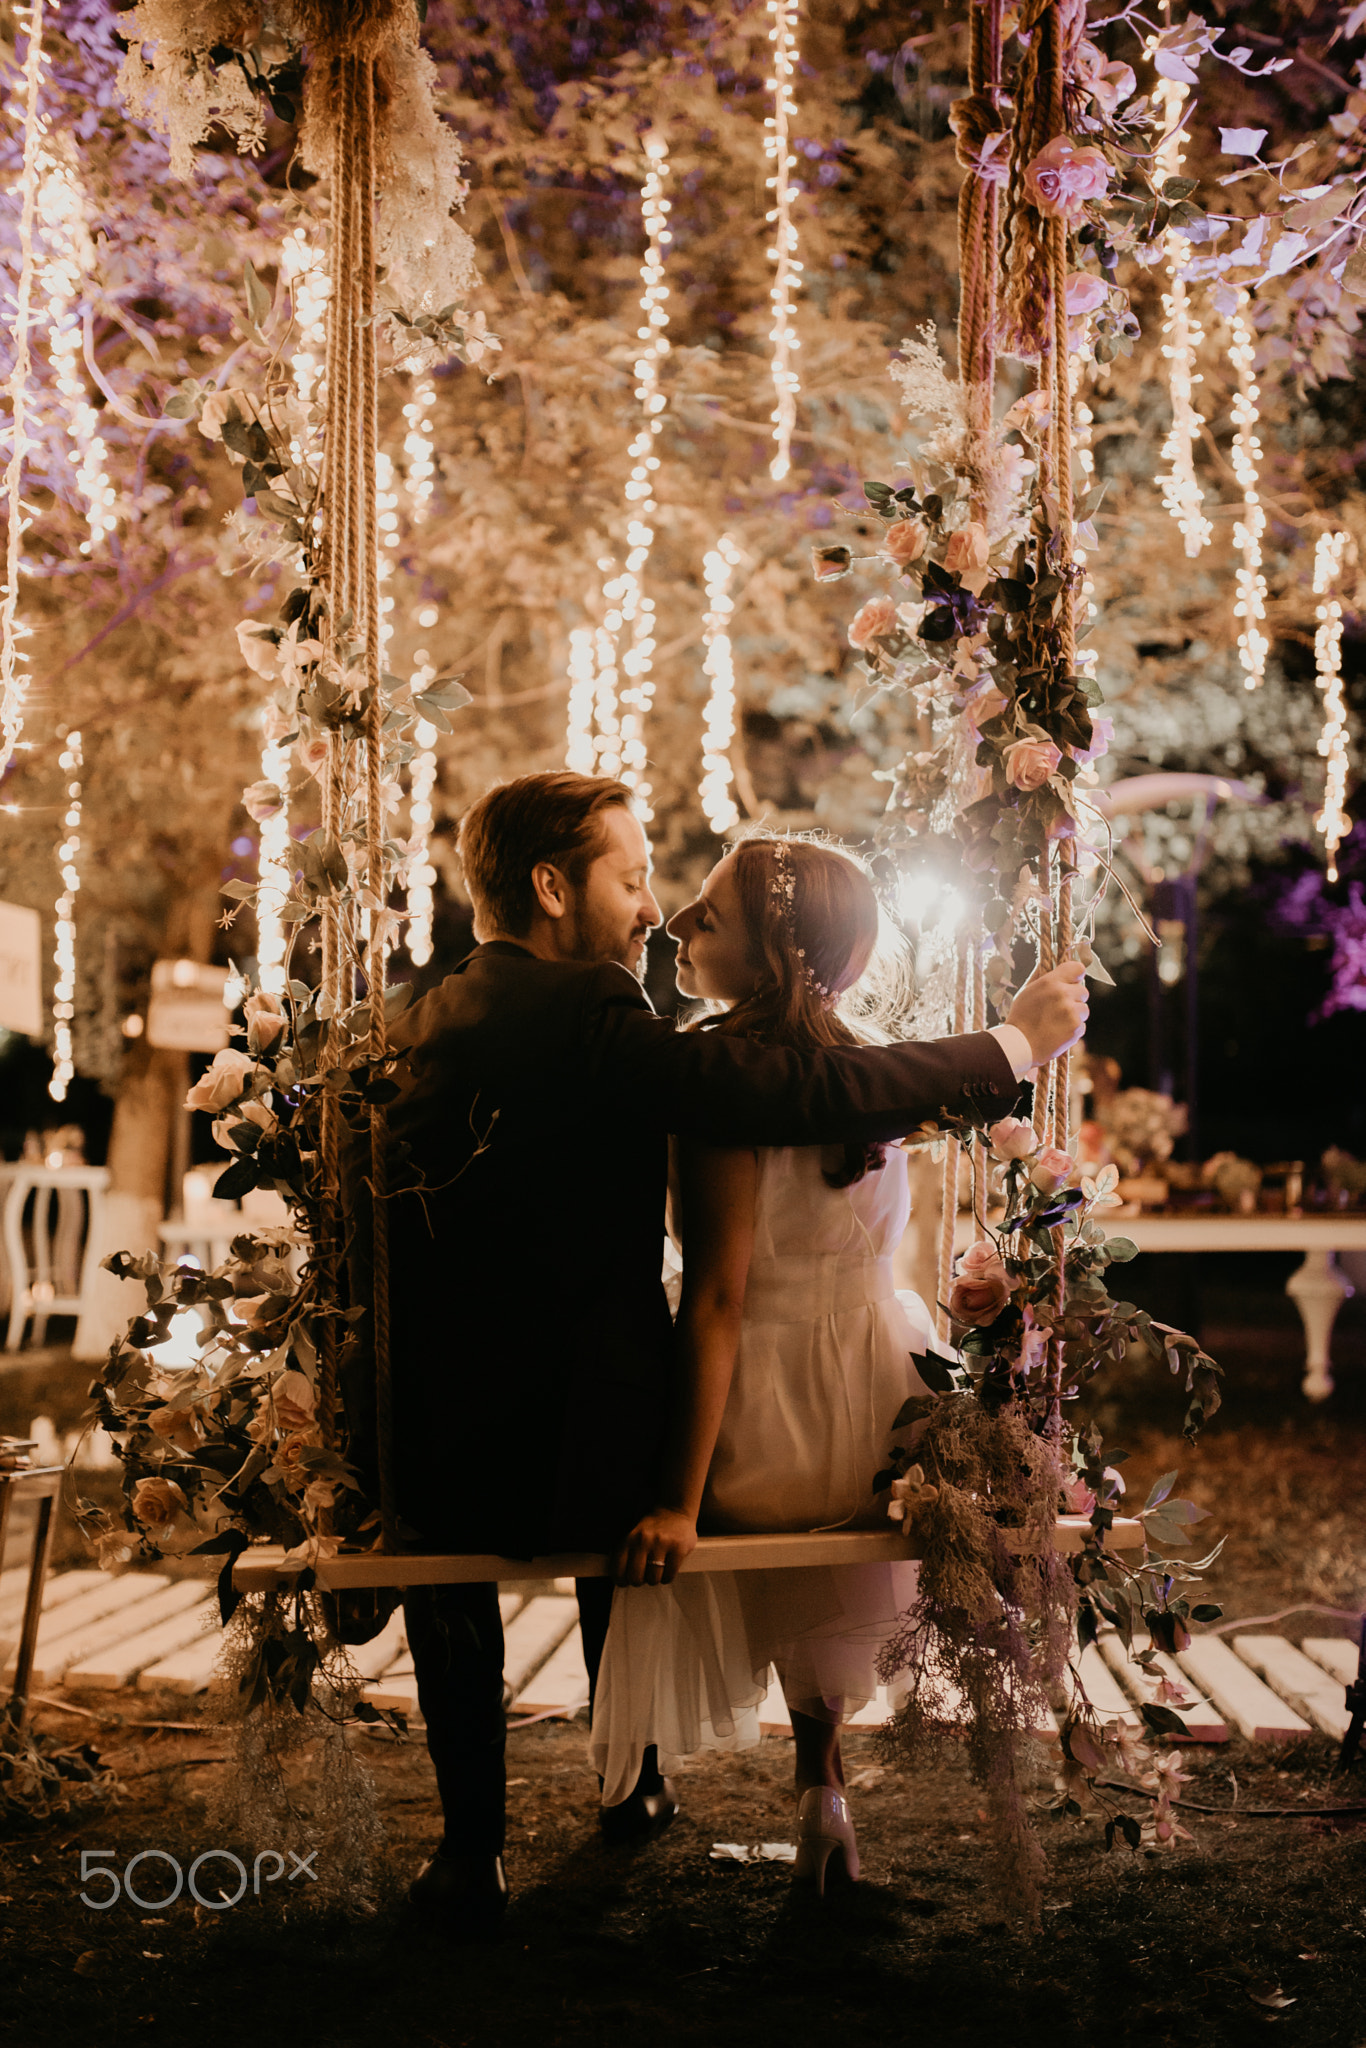 newlyweds kiss after a wedding in a decorated forest on a swing